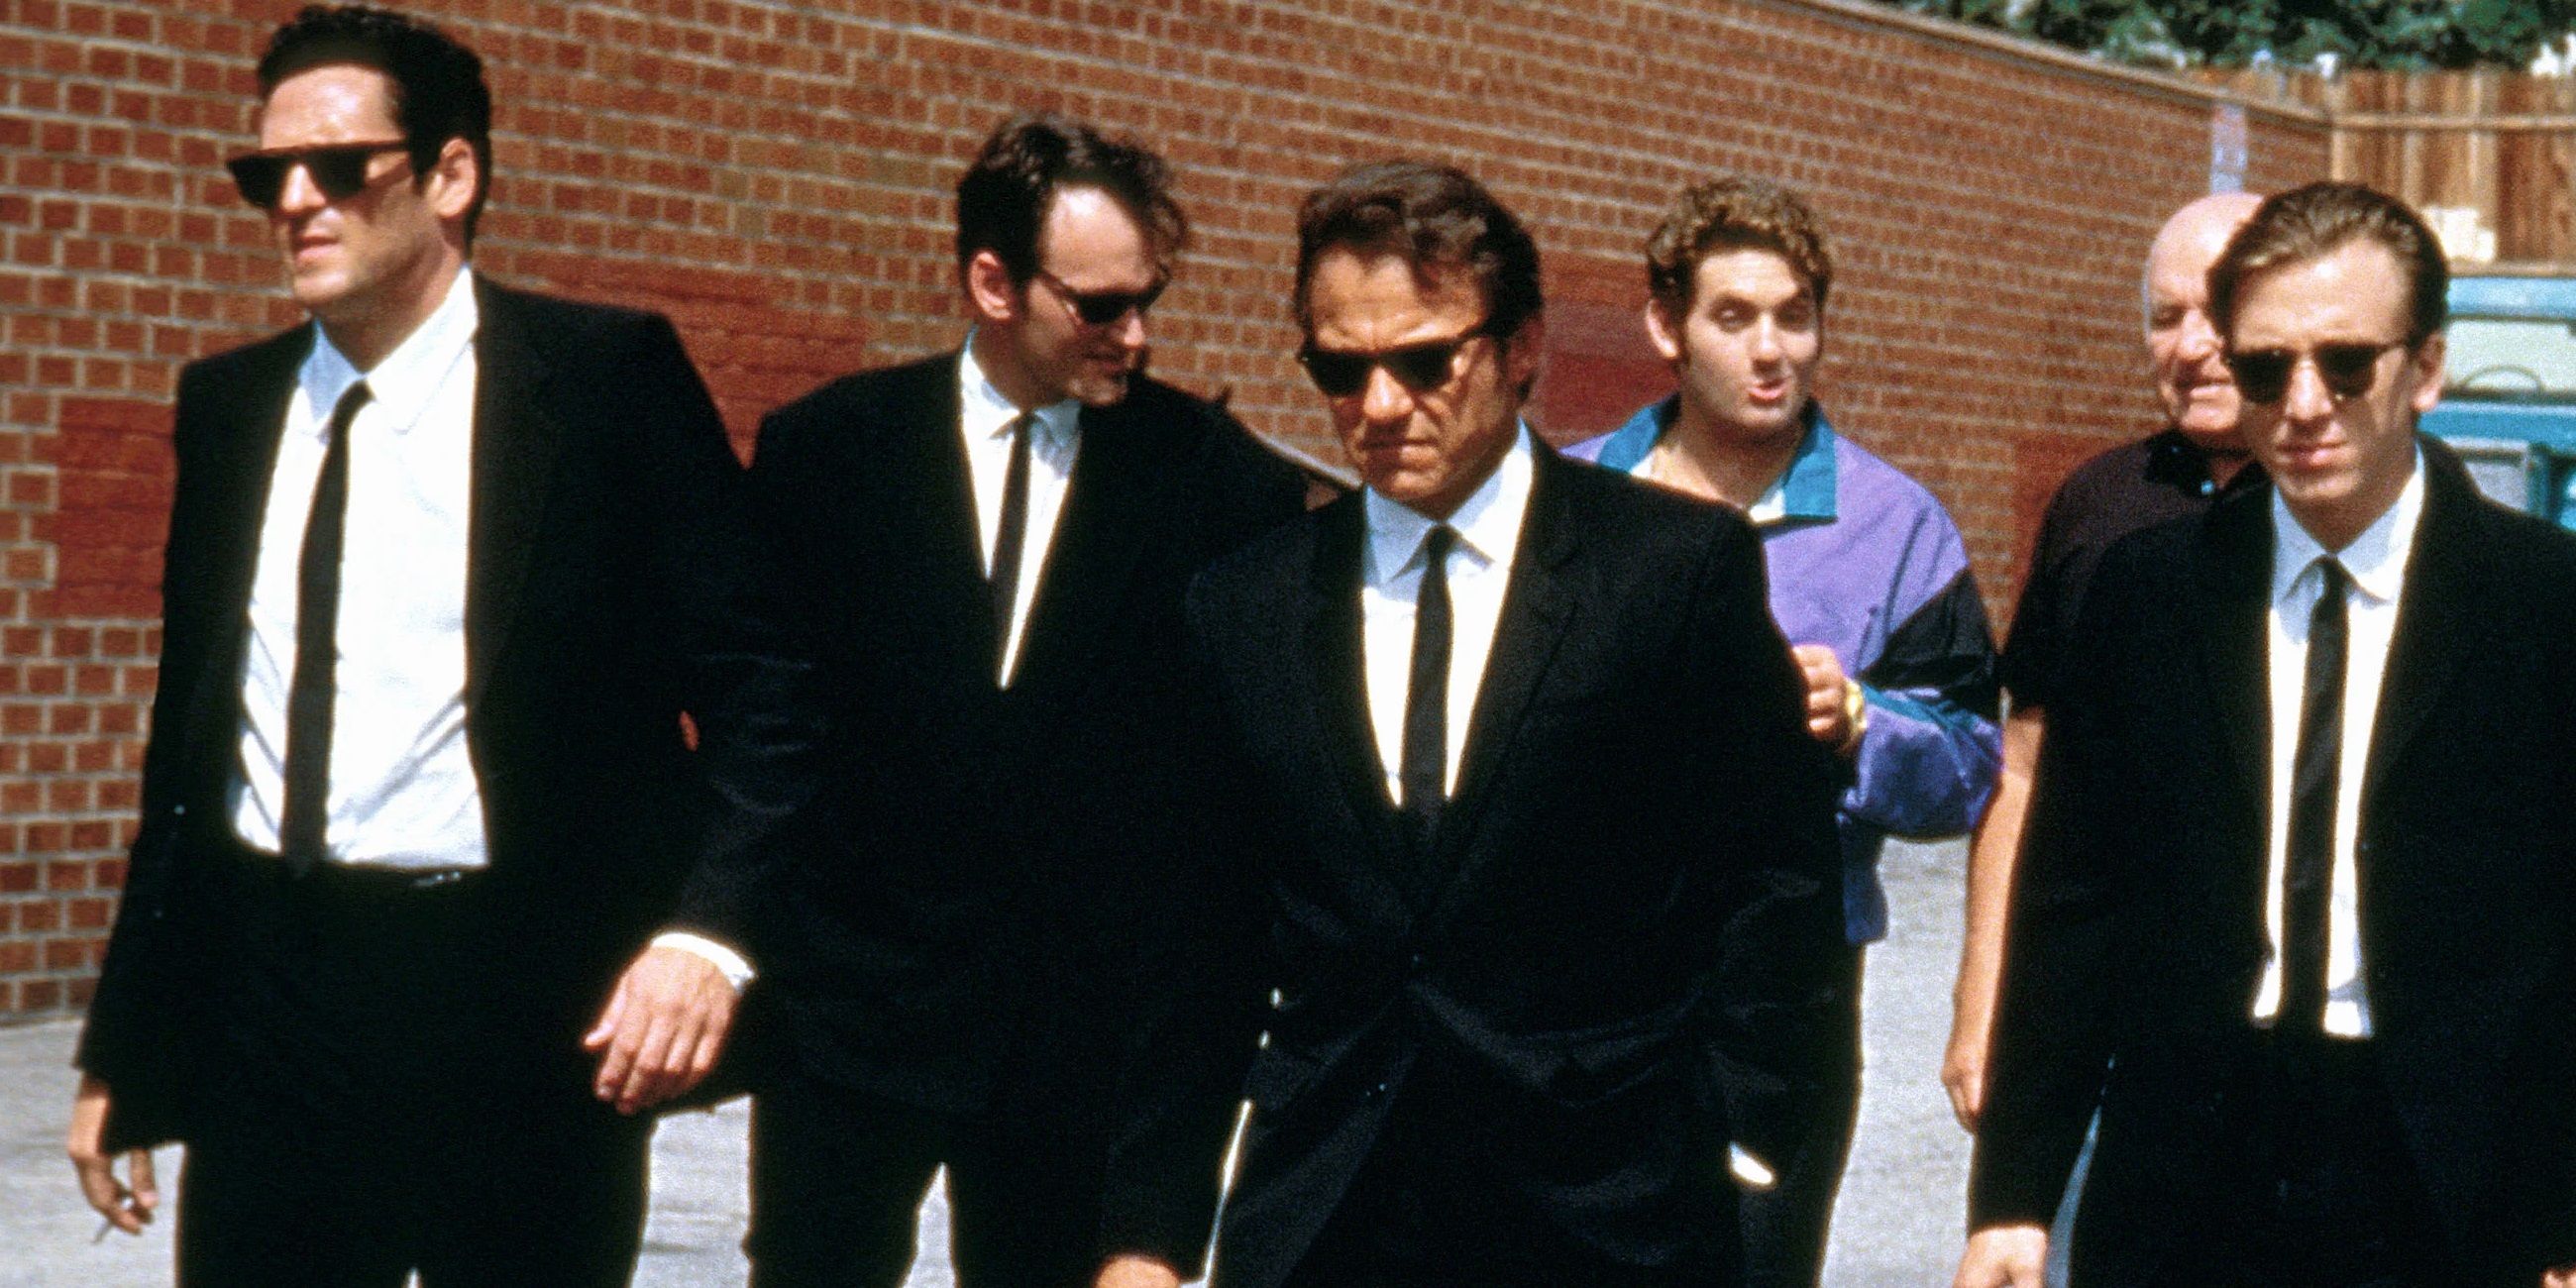 The opening credits of Reservoir Dogs